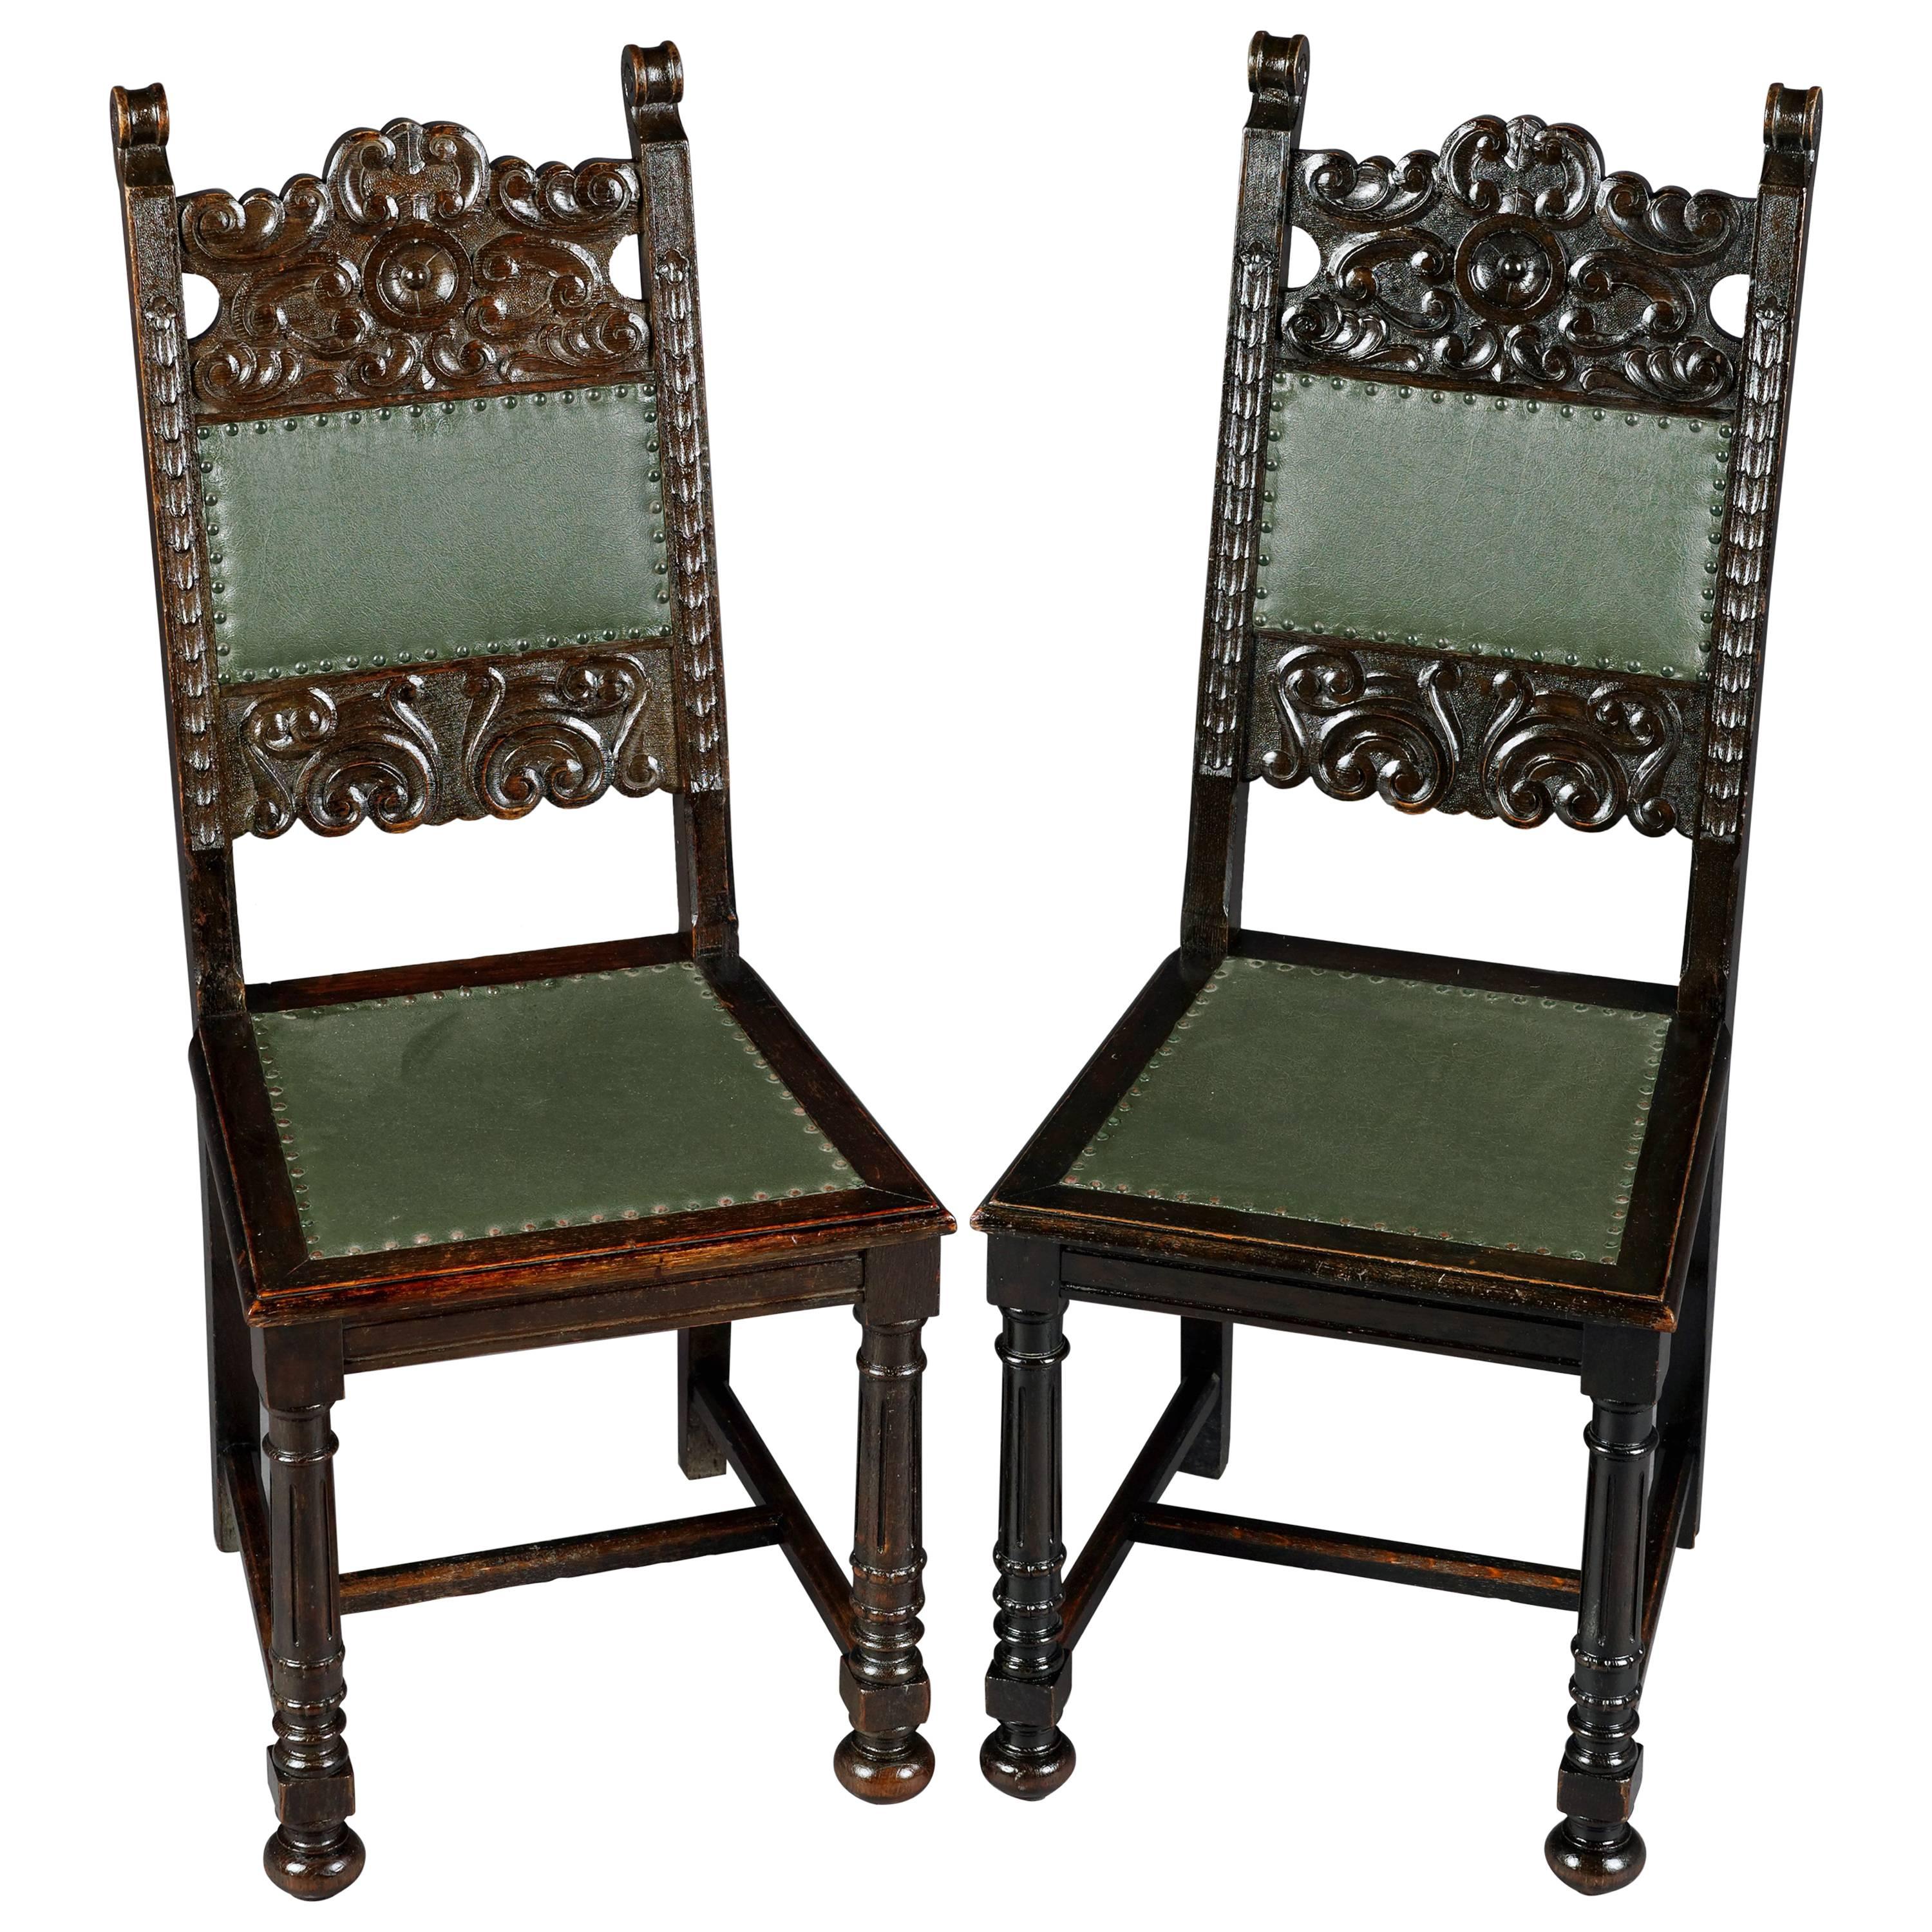 19th Century Two Antique Chairs of the Neo-Renaissance Period, circa 1870-1880